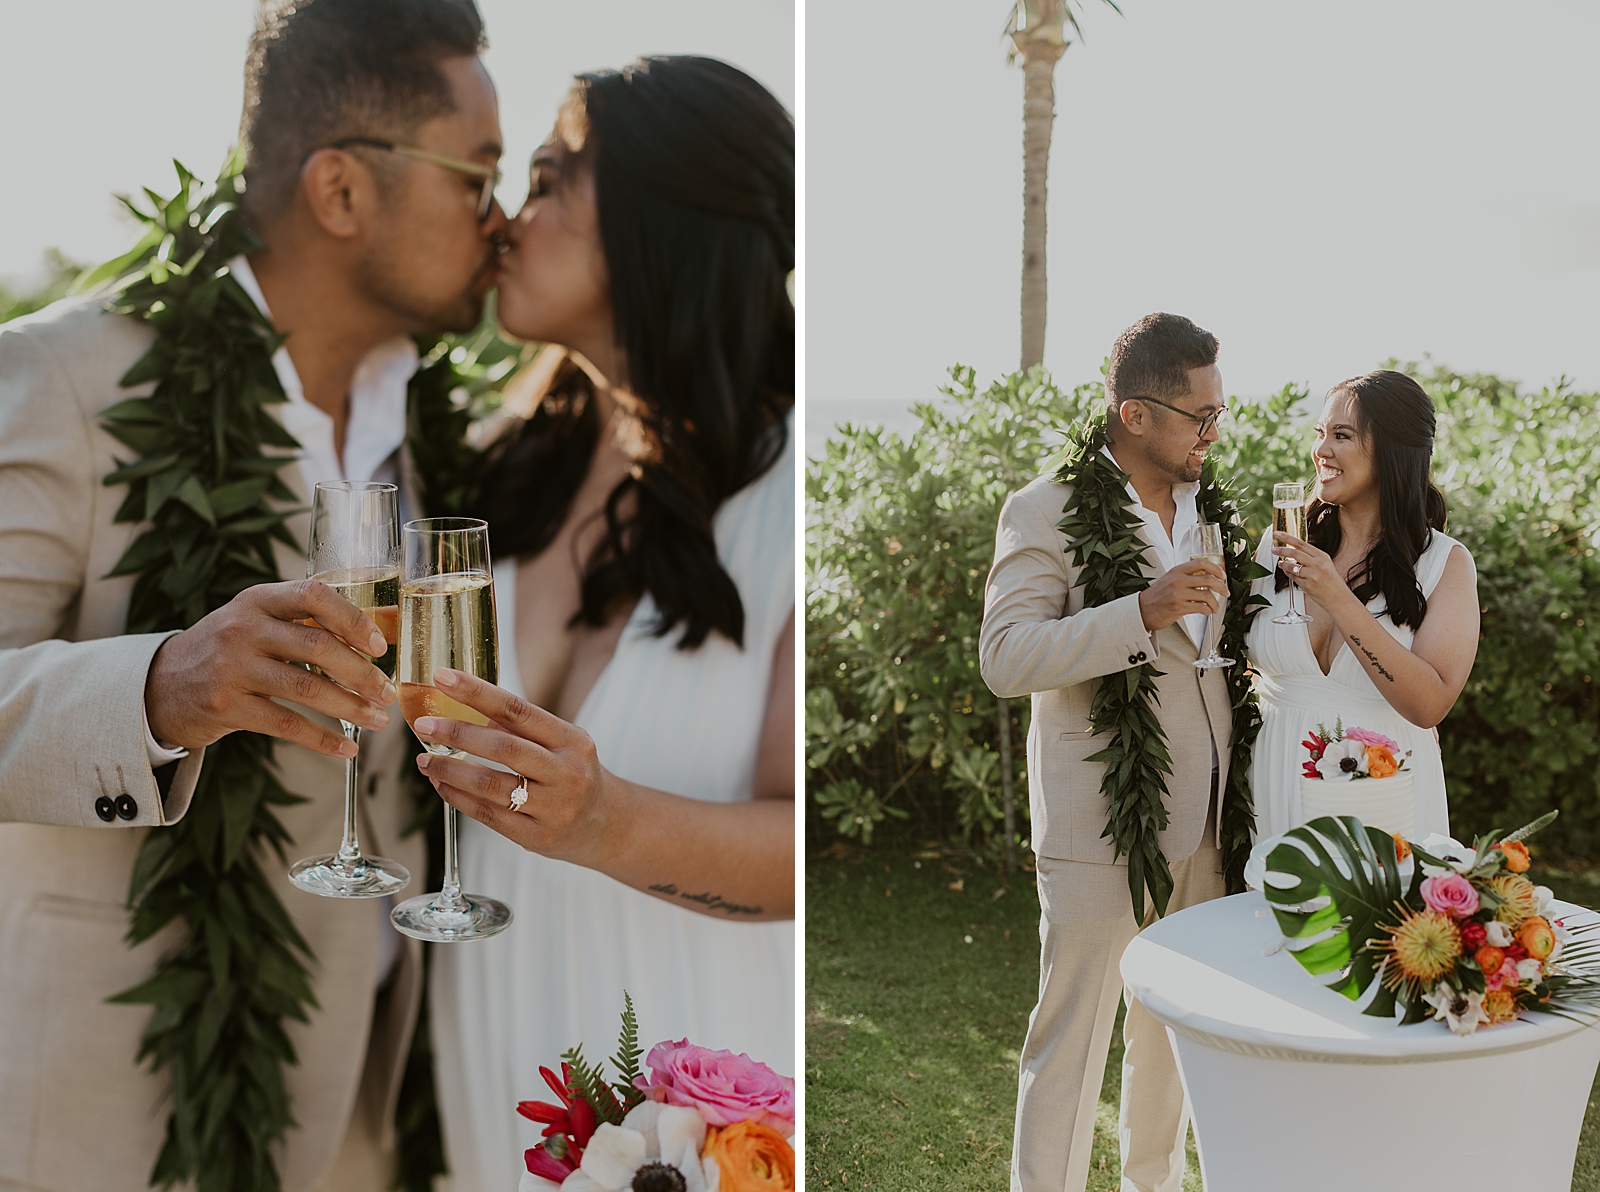 Couple kissing and cheering their Champaign glasses